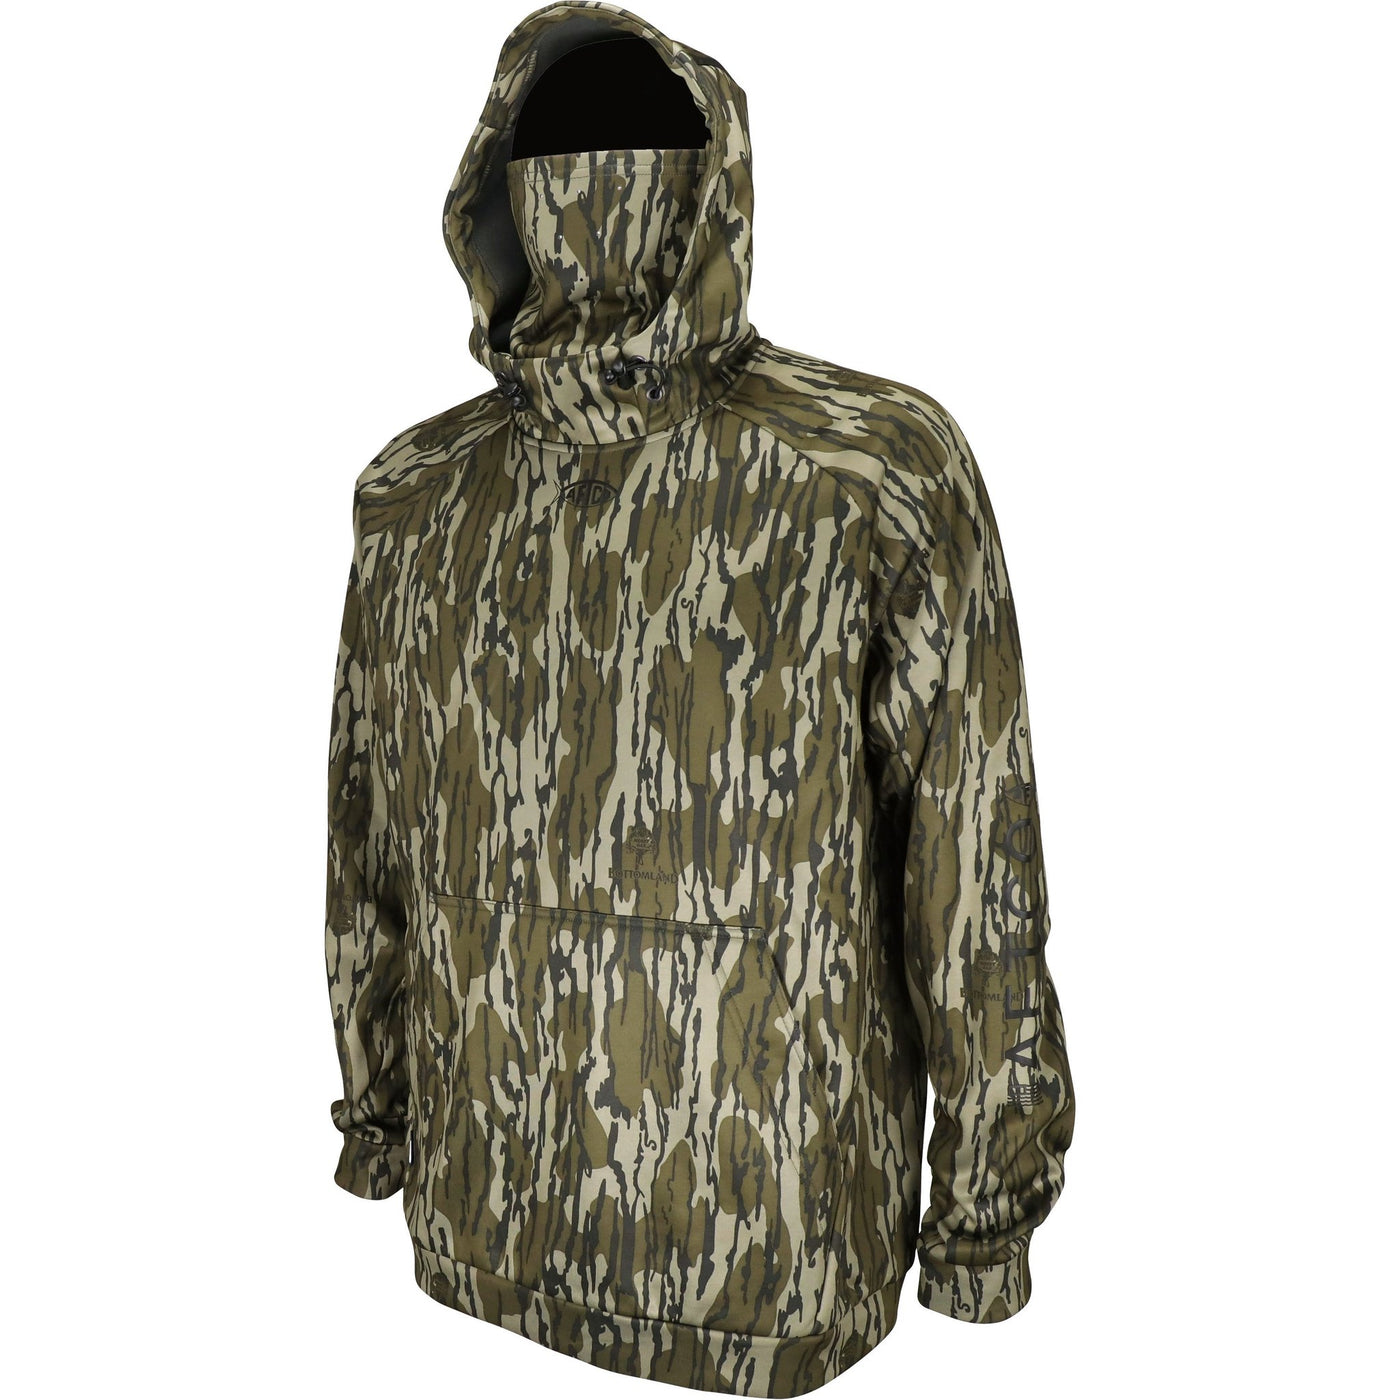 AFTCO Reaper Technical Fleece Hoodie-MENS CLOTHING-Mossy Oak Bottomland-S-Kevin's Fine Outdoor Gear & Apparel